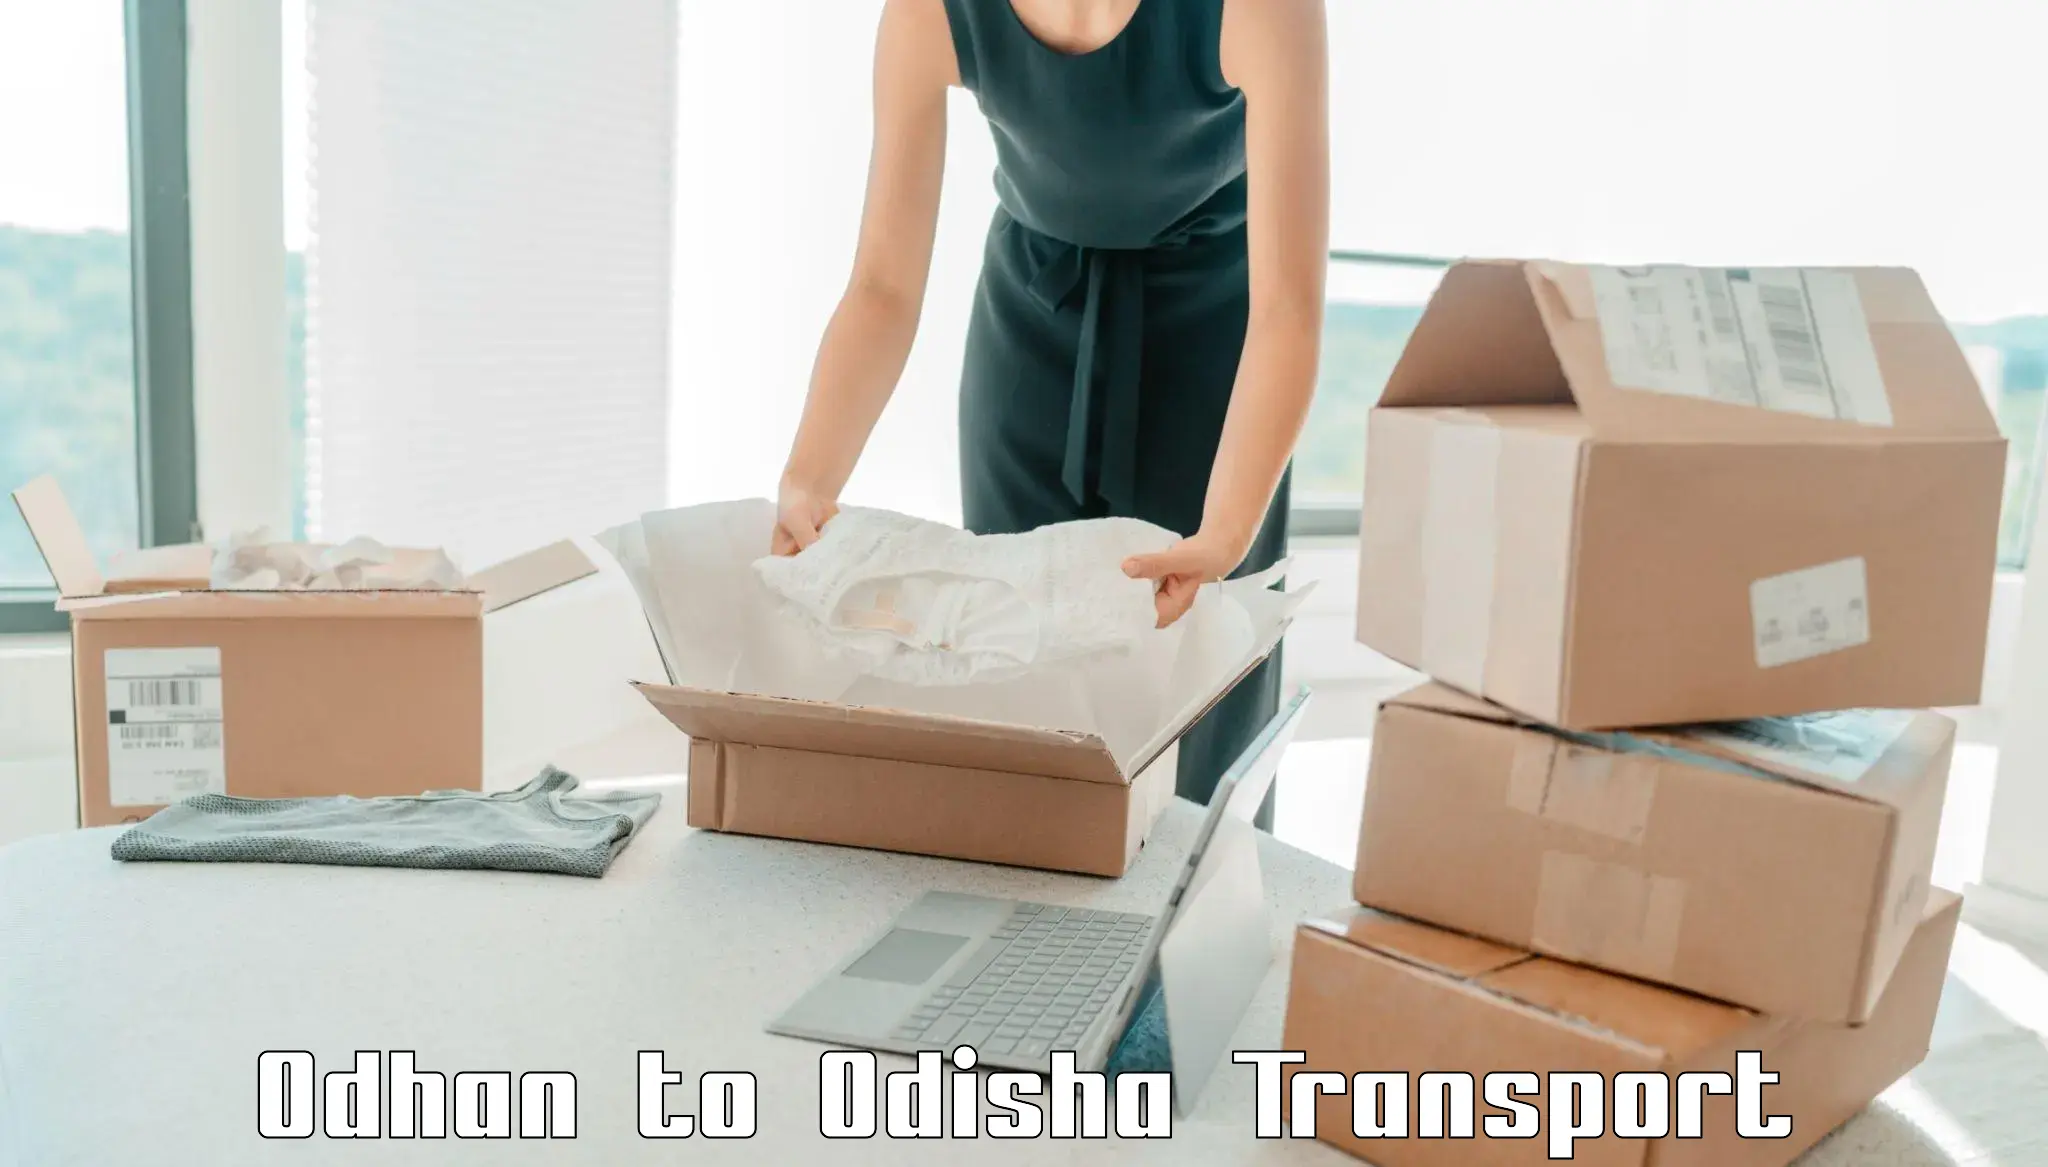 Domestic goods transportation services Odhan to Basta